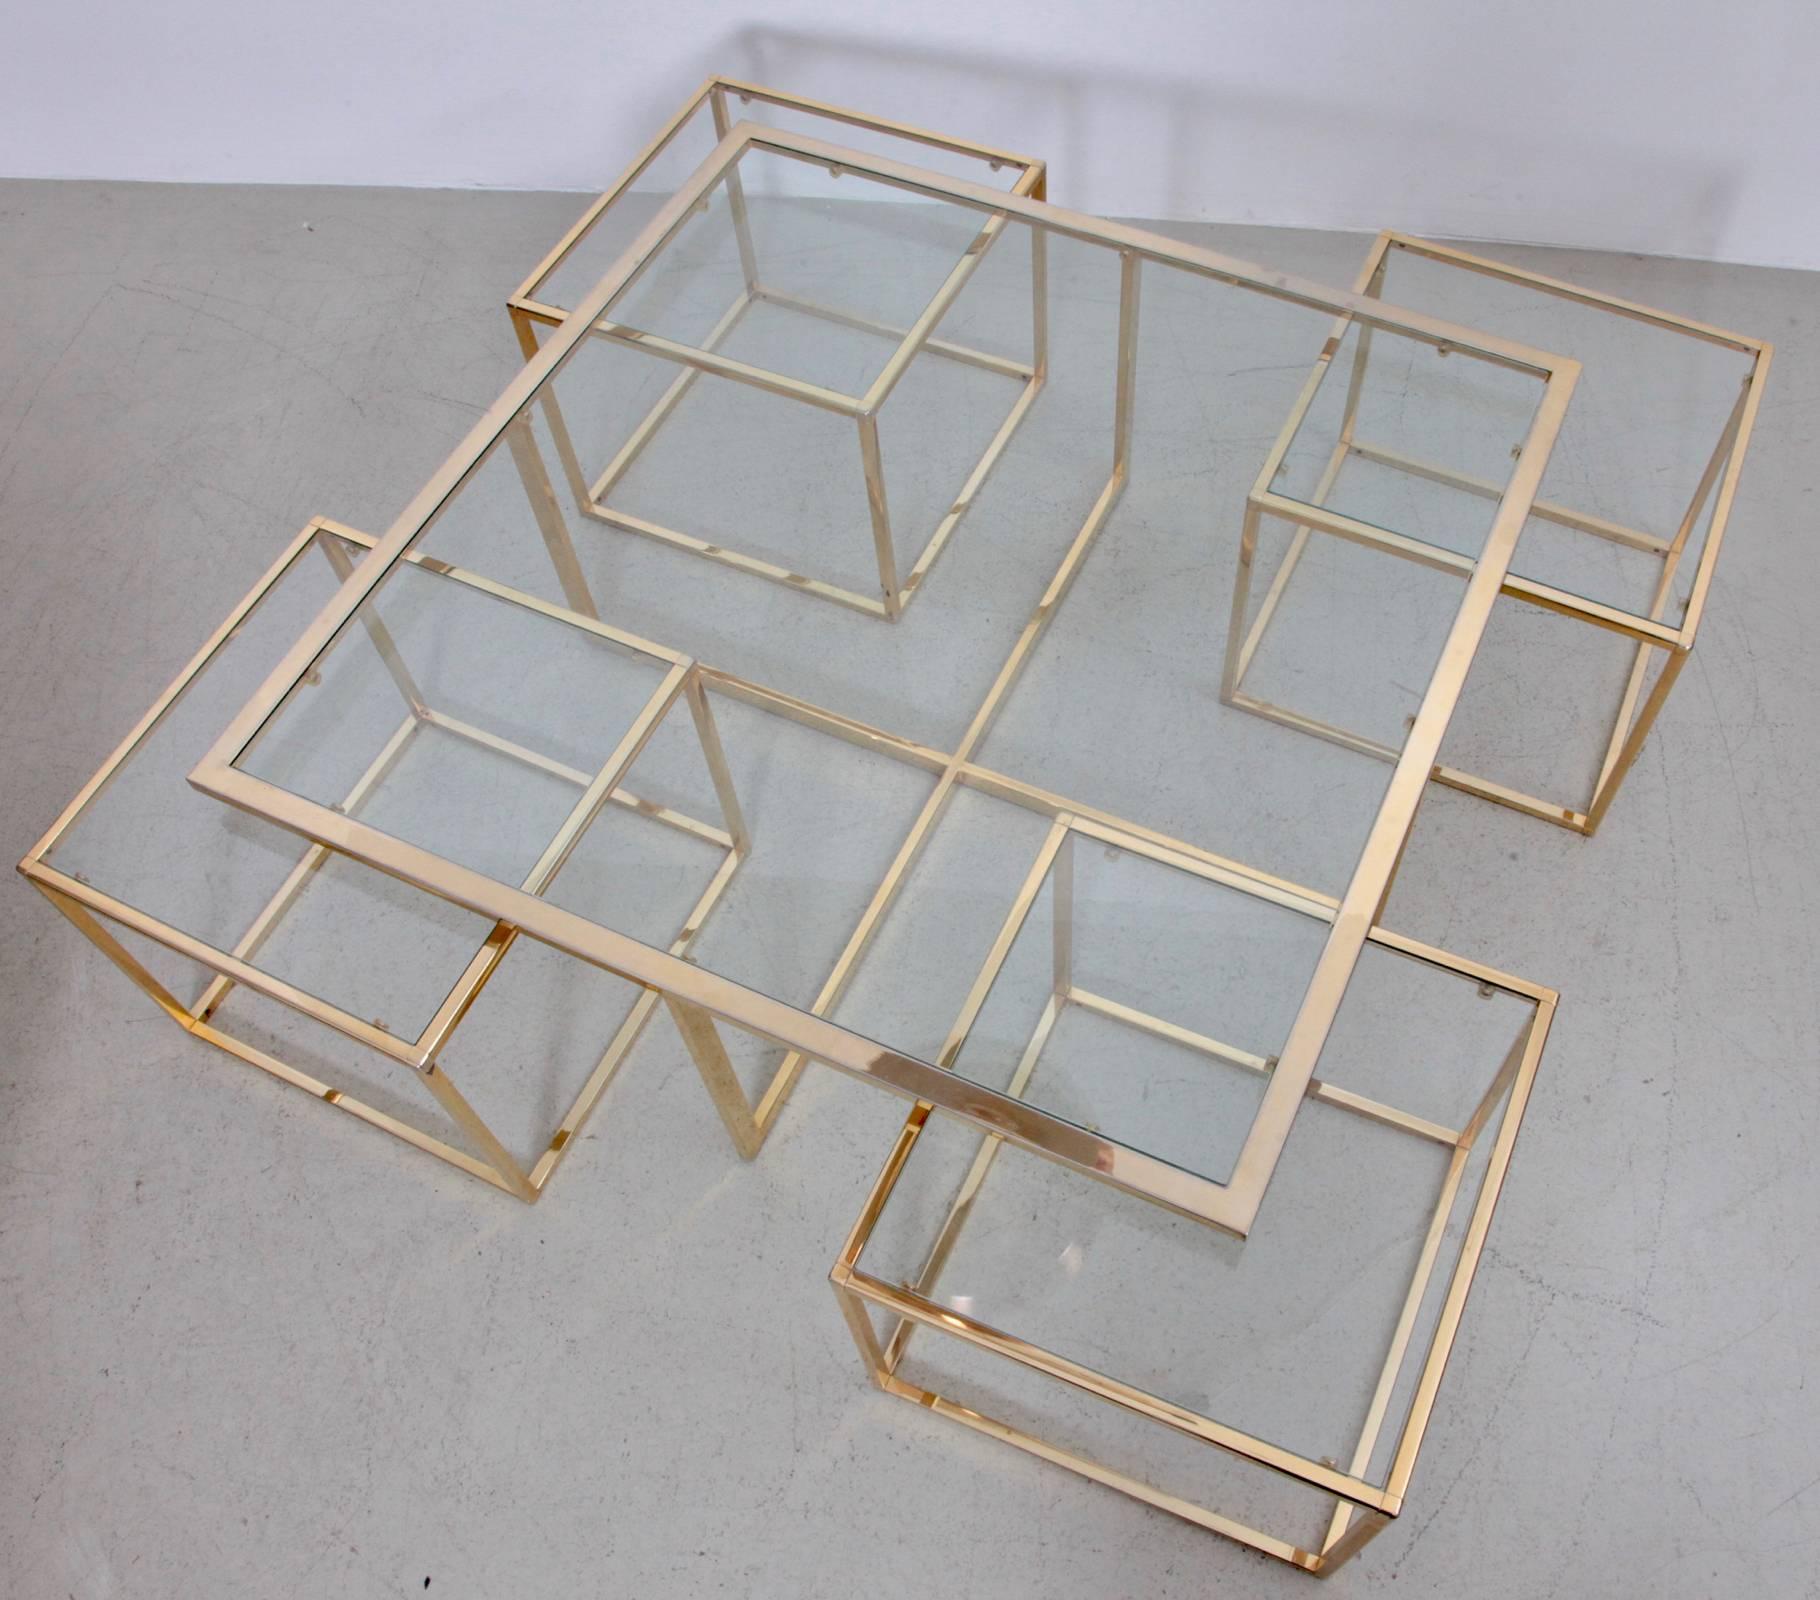 Beautiful coffee table with four nesting tables in brass by Maison Charles. The glass plates are loosely inserted to create the table surfaces. The table is in very good condition.

